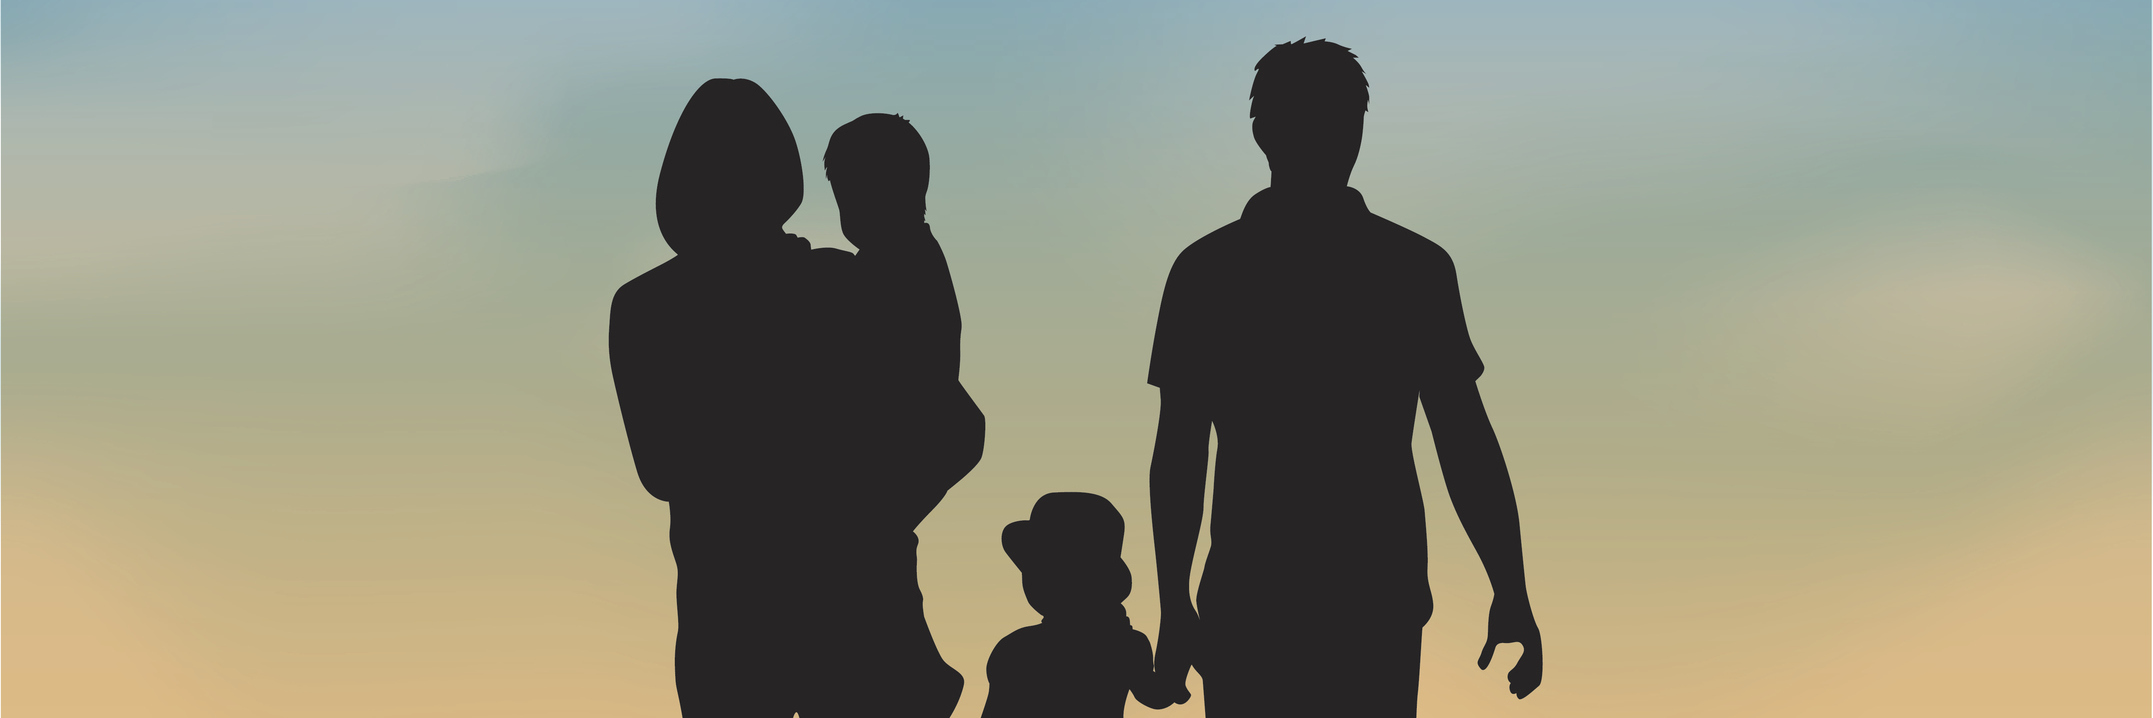 silhouette of family of four walking outside